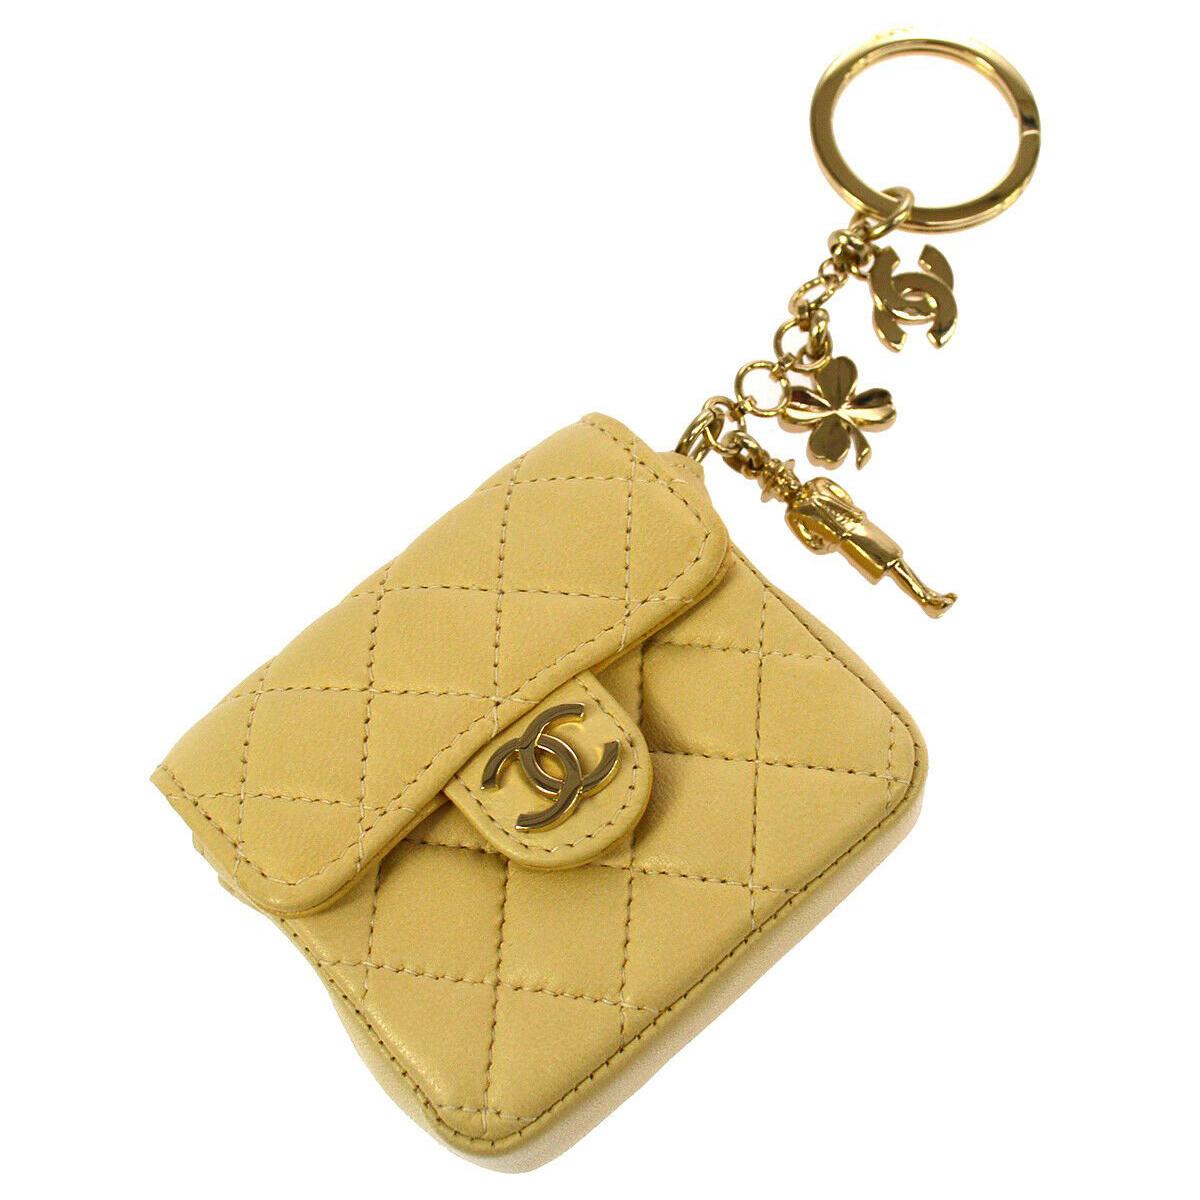 Chanel Leather Tan Nude Charm Belt Party Micro Mini Chain Flap Bag